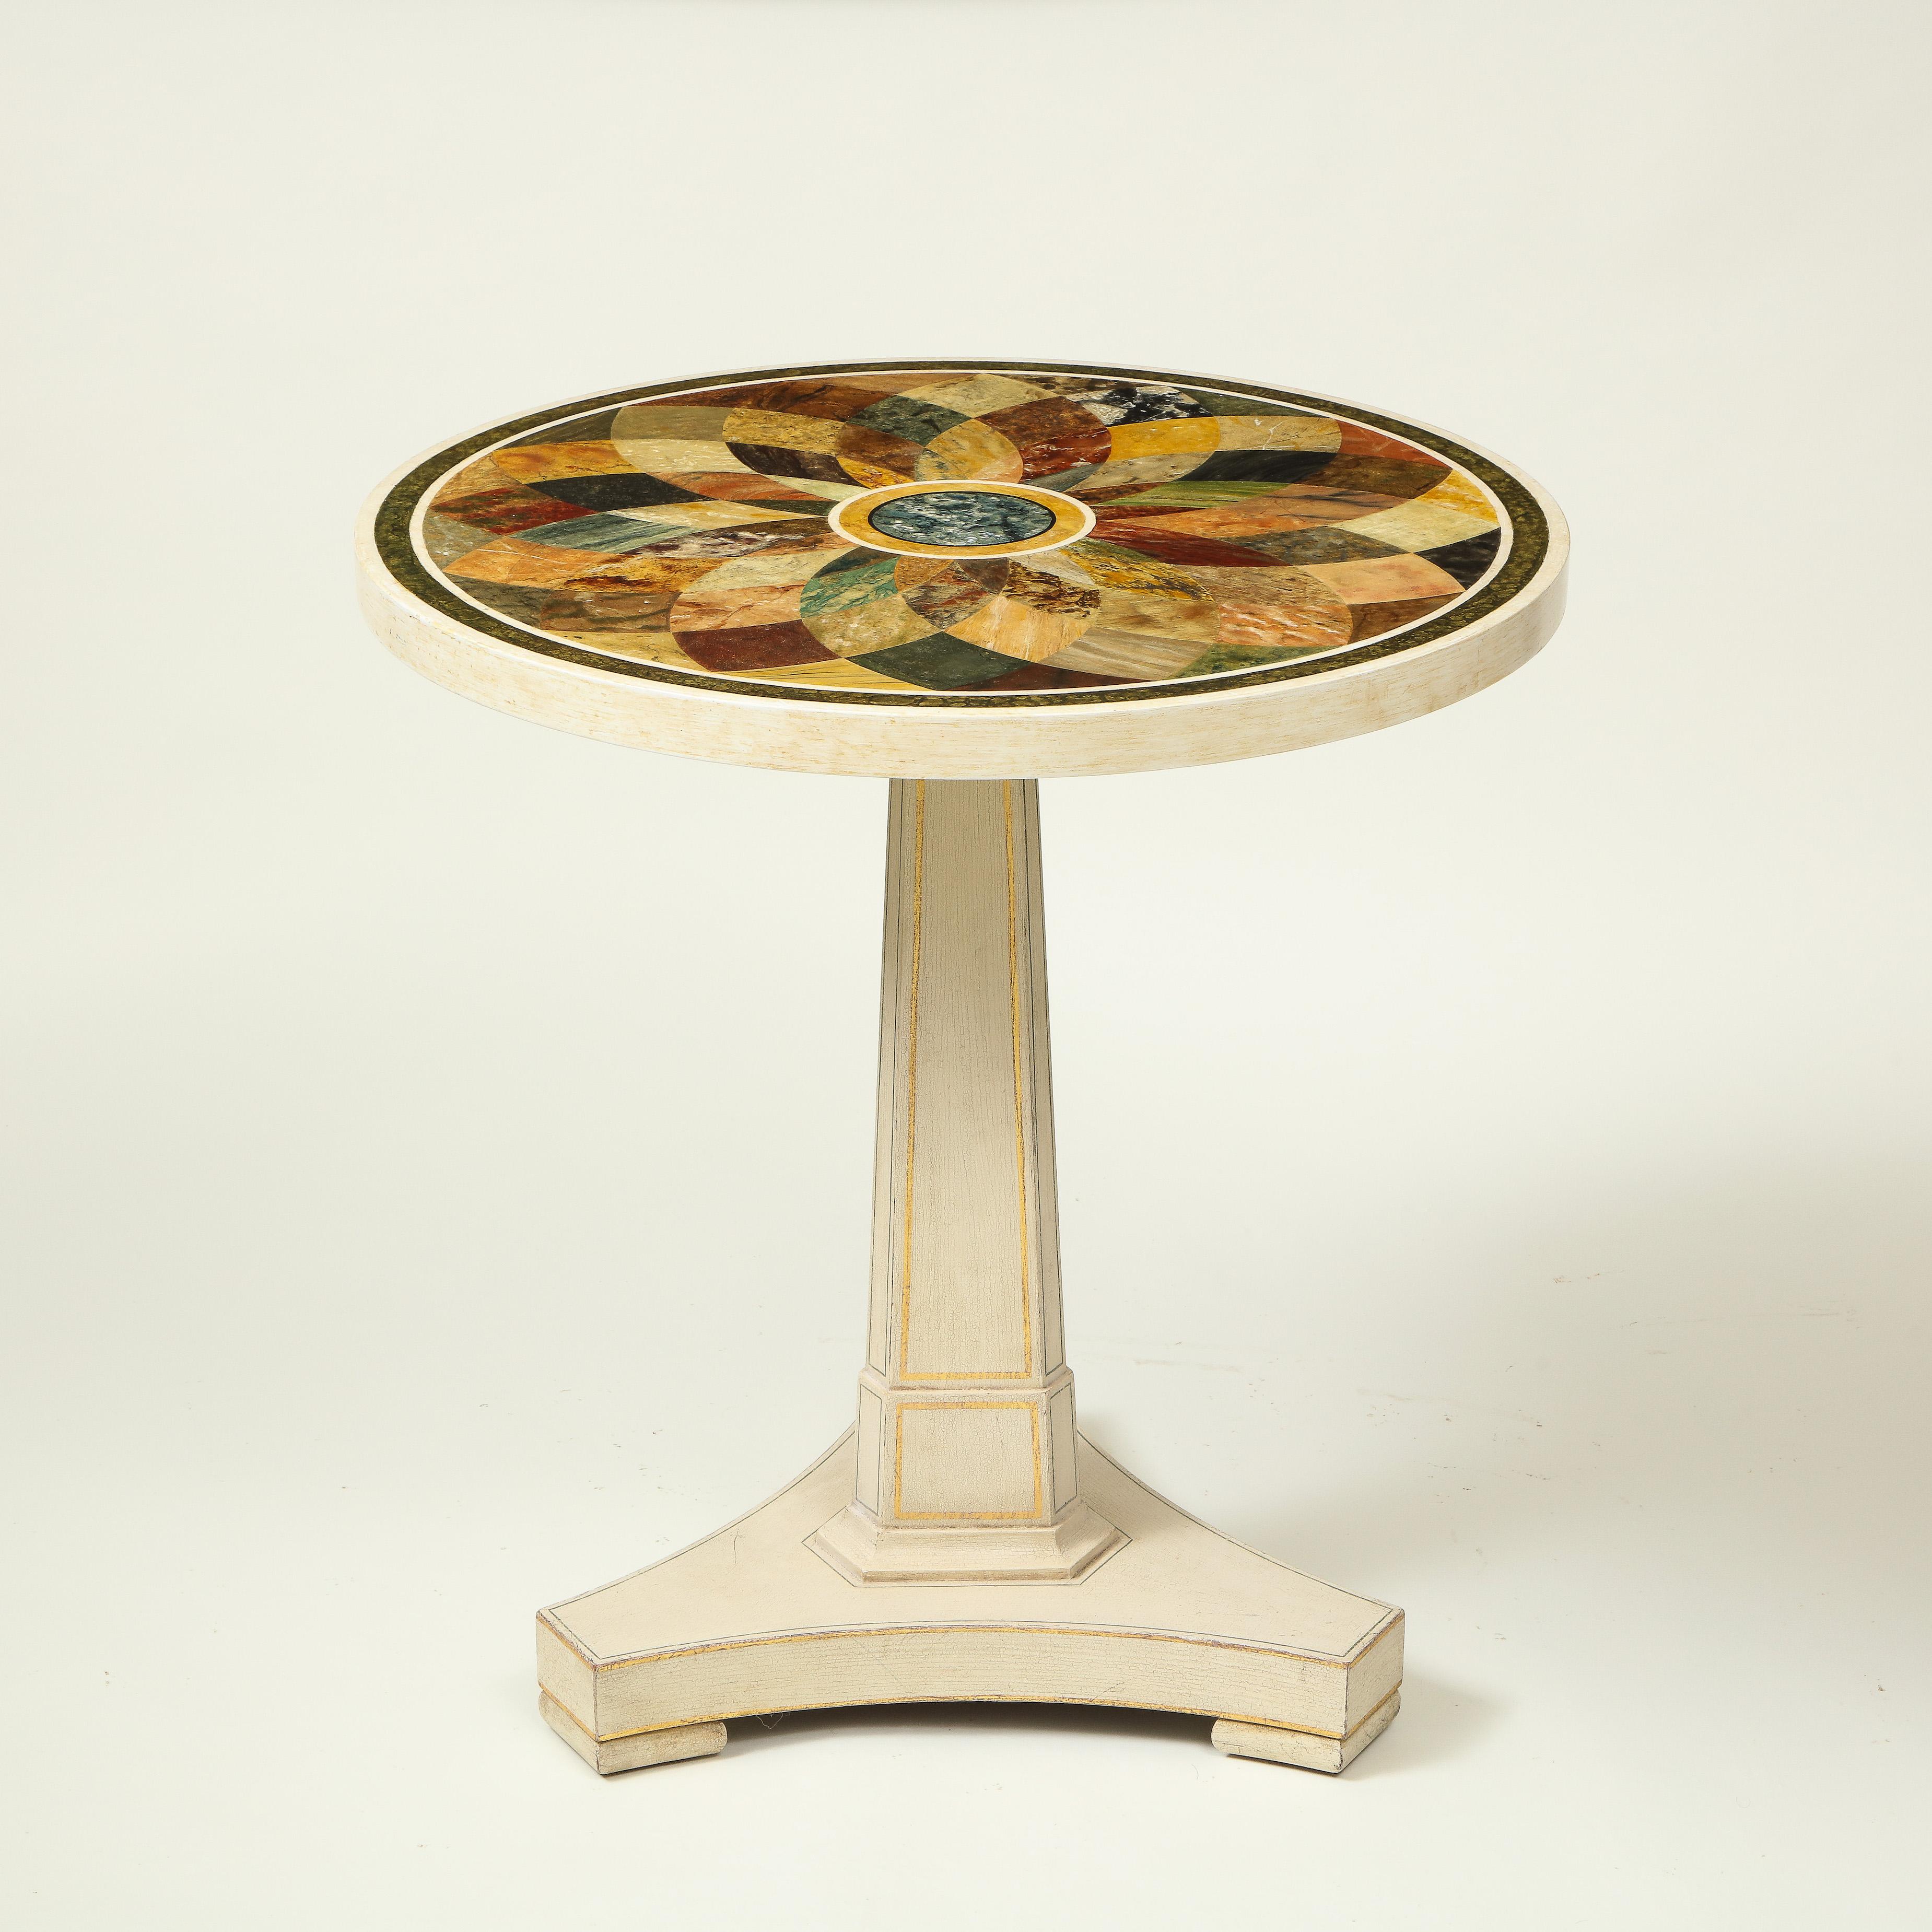 The circular top painted with radiating faux specimen marbles, raised on an ivory-painted spreading square columnar support on tripartite plinth base and block feet, with gilt and ebony painted stringing. Attributed to Colefax &